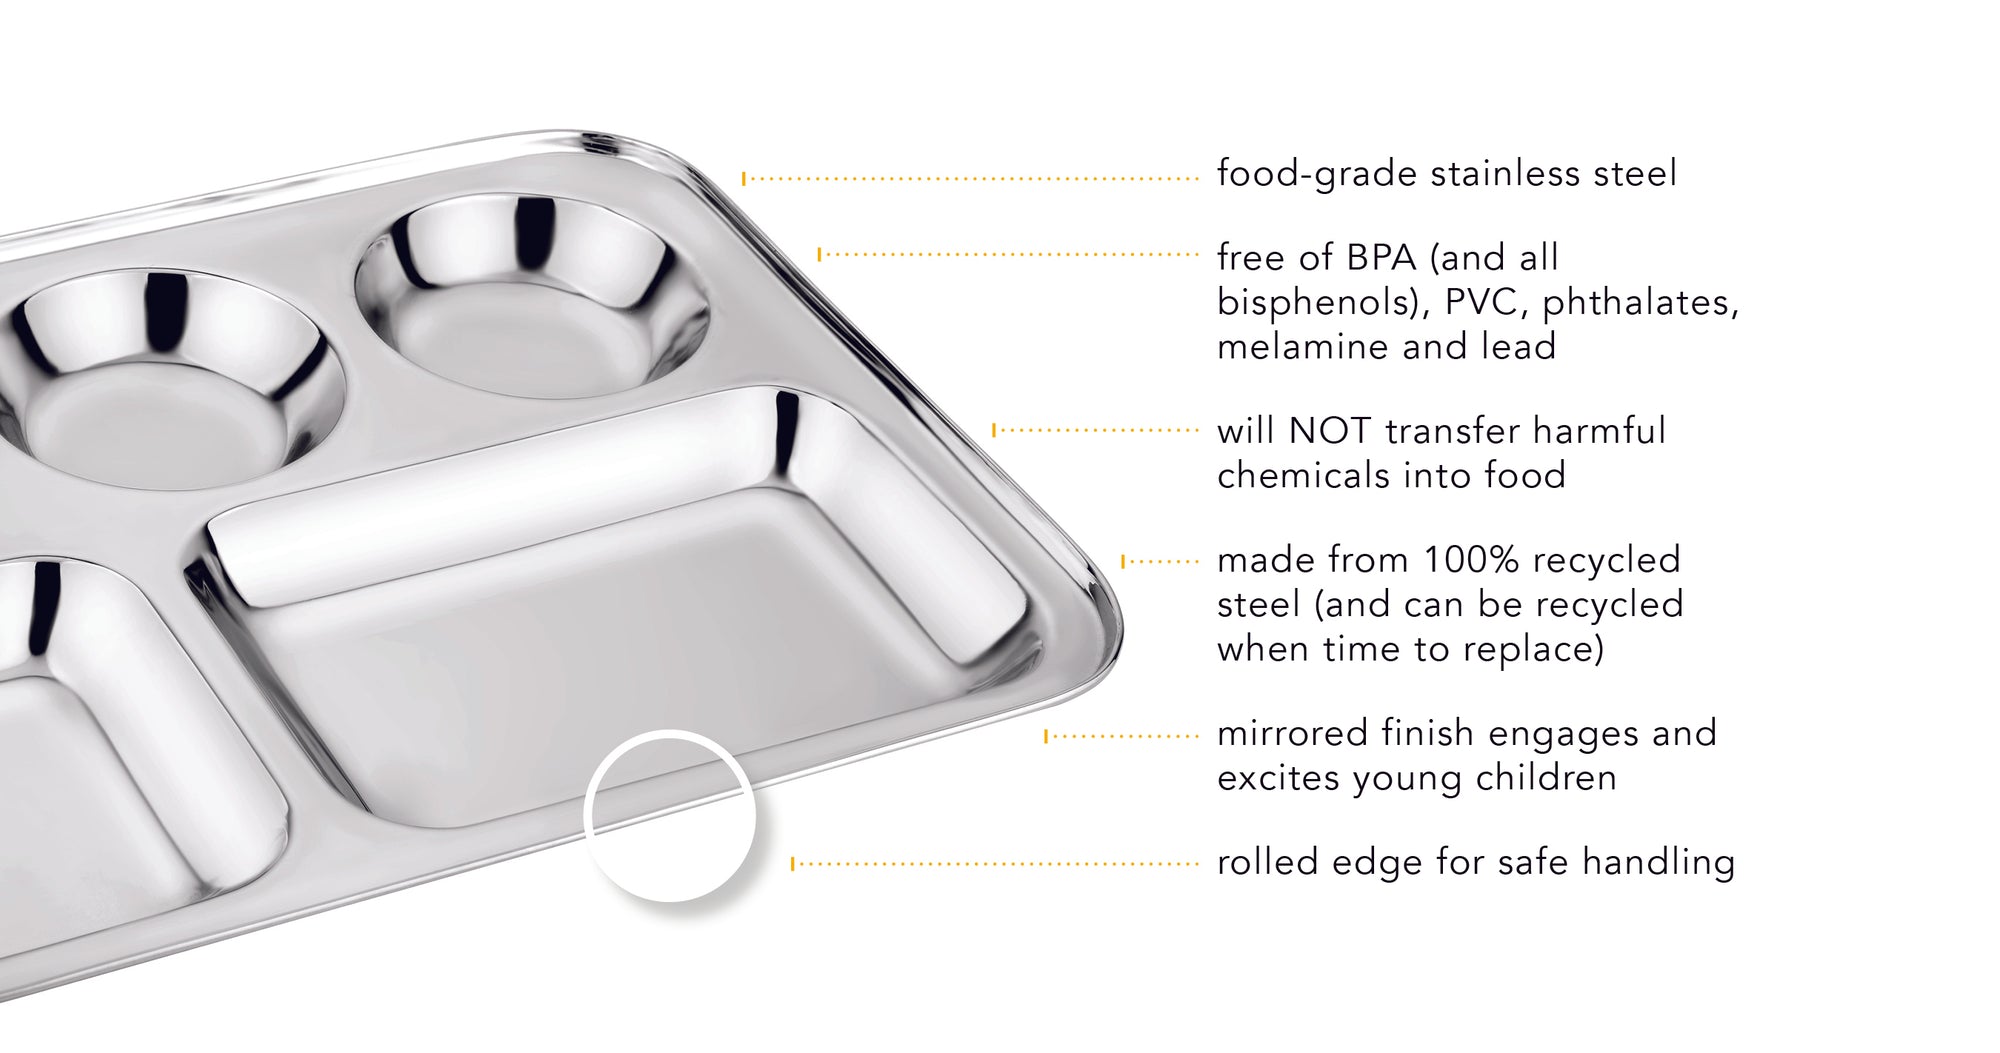 Our cafeteria trays are food-grade stainless steel, free of BPA (and all bisphenols), PVC, phthalates, melamine and lead, harmful chemicals will not transfer into food, made from 100% recycled steel, mirrored finish engages children, and the rolled edge